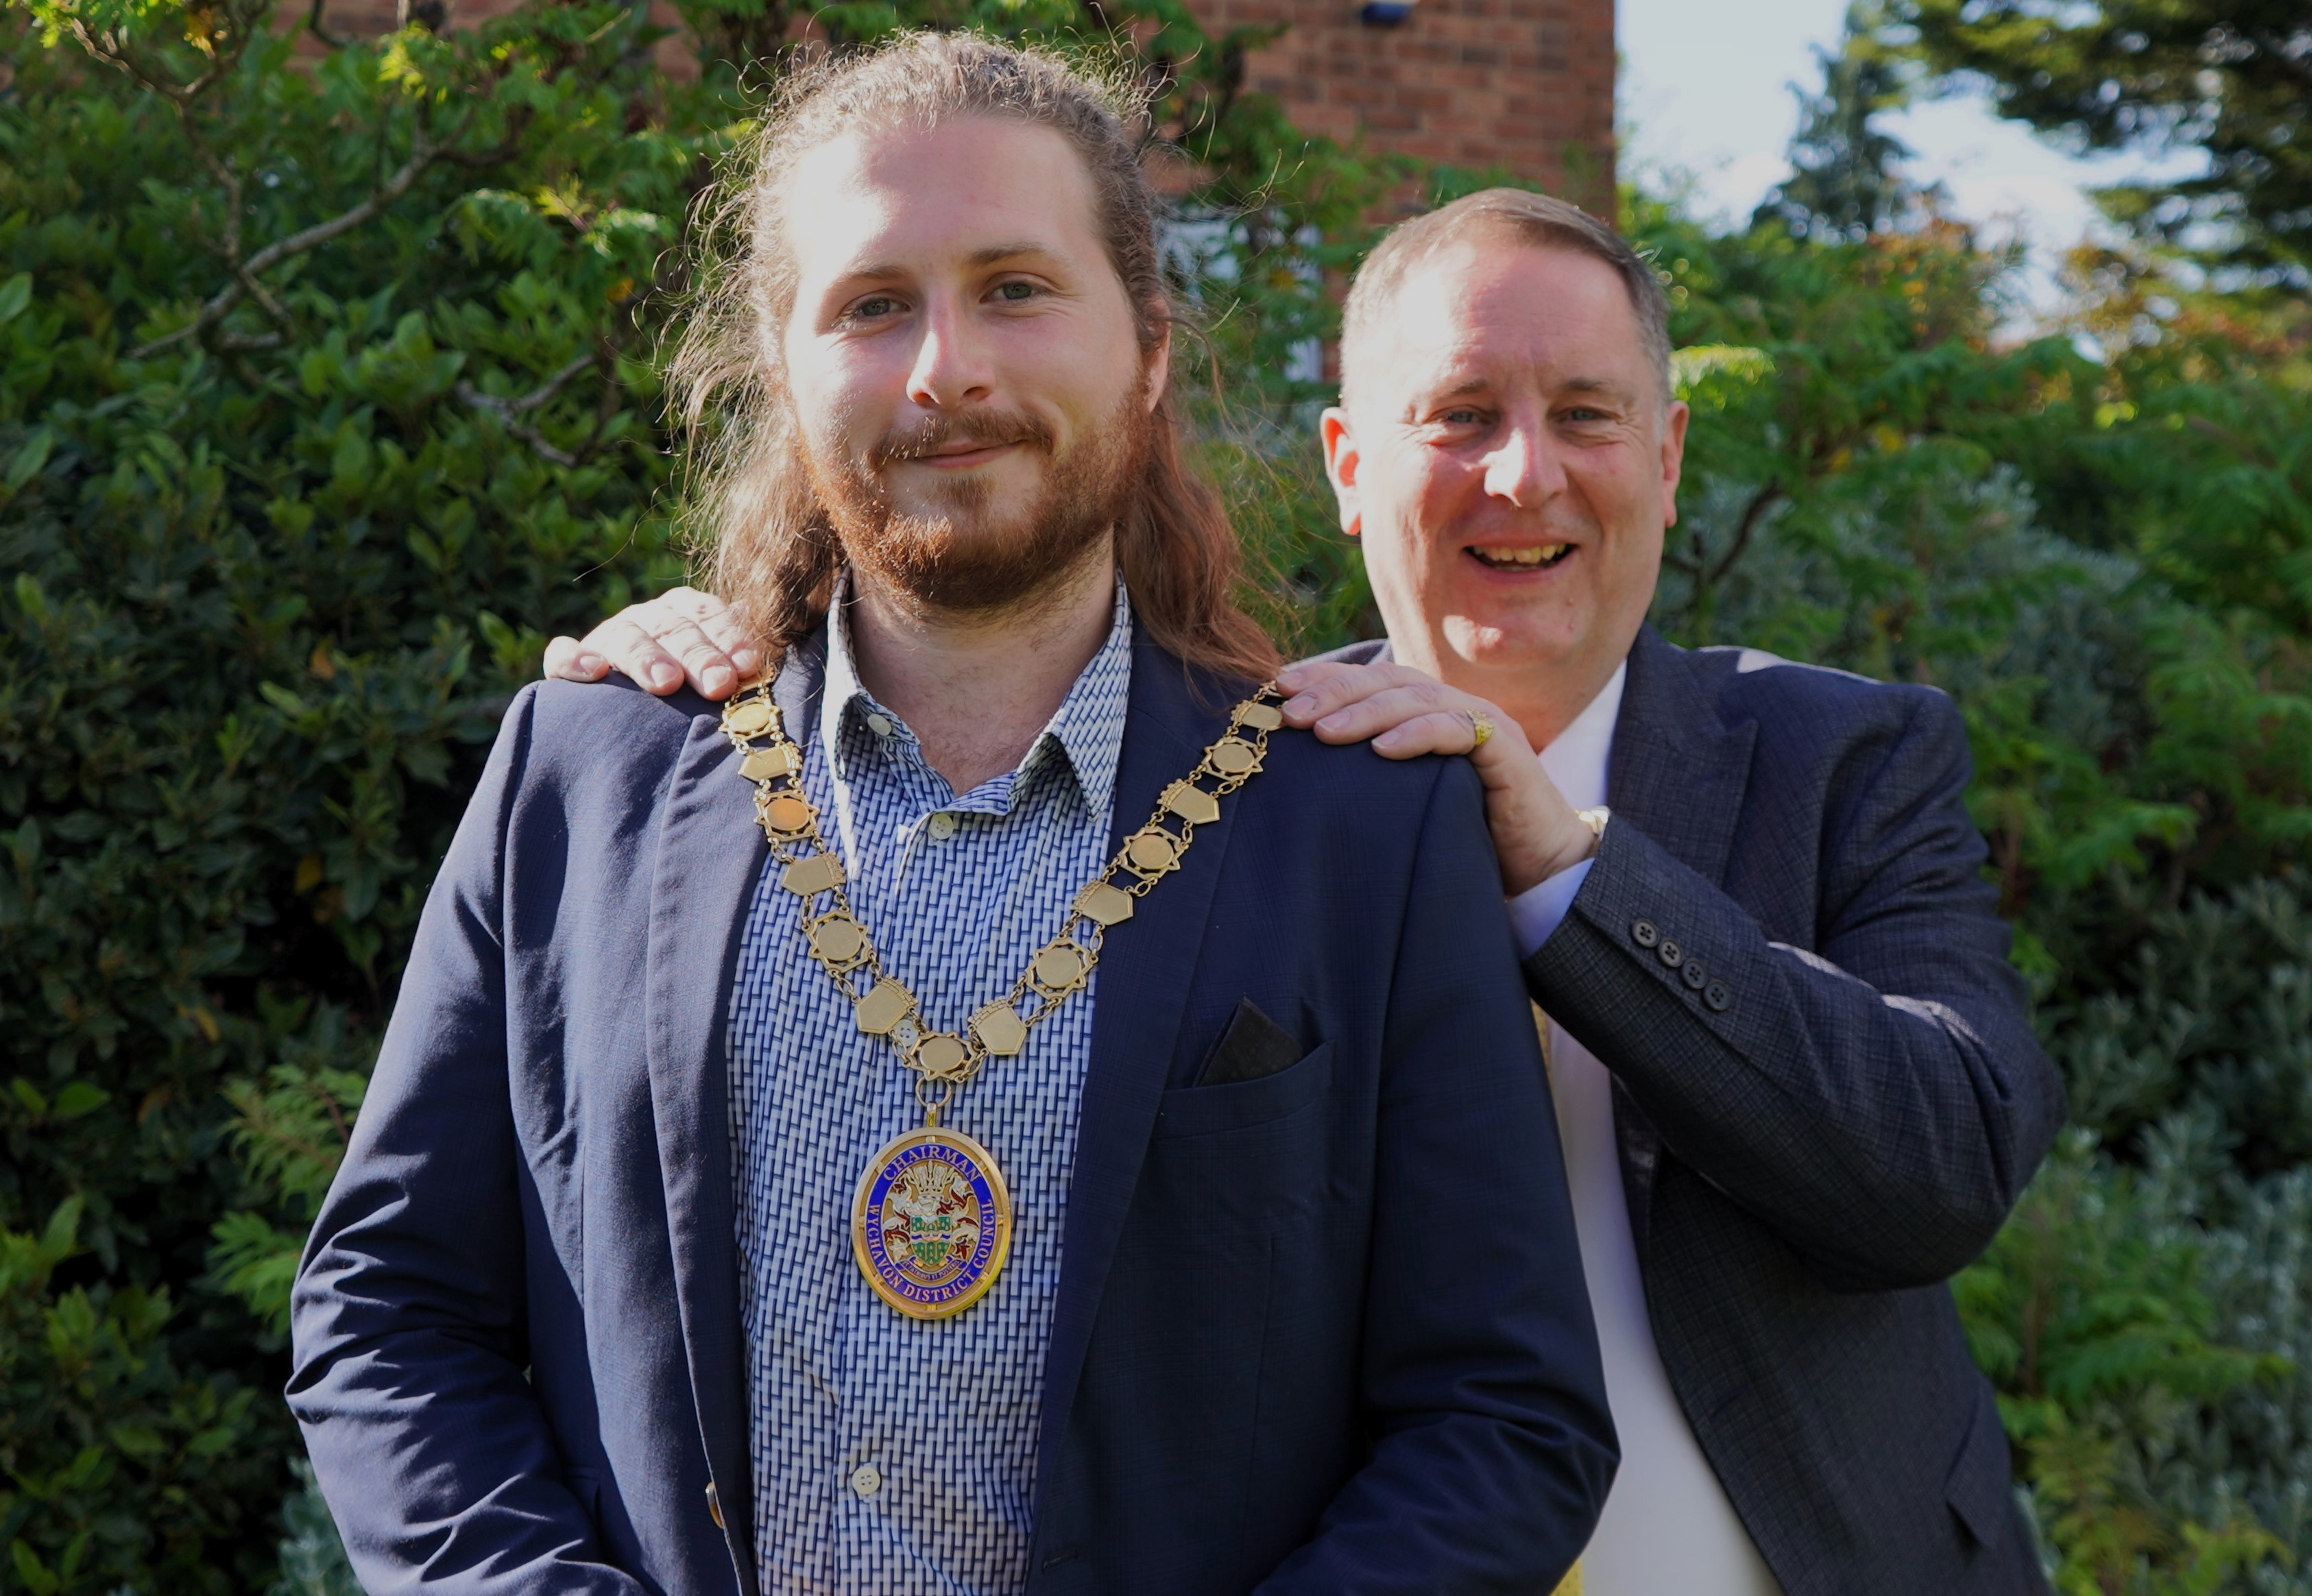 A man stood behind another man putting a mayoral chain over his head.